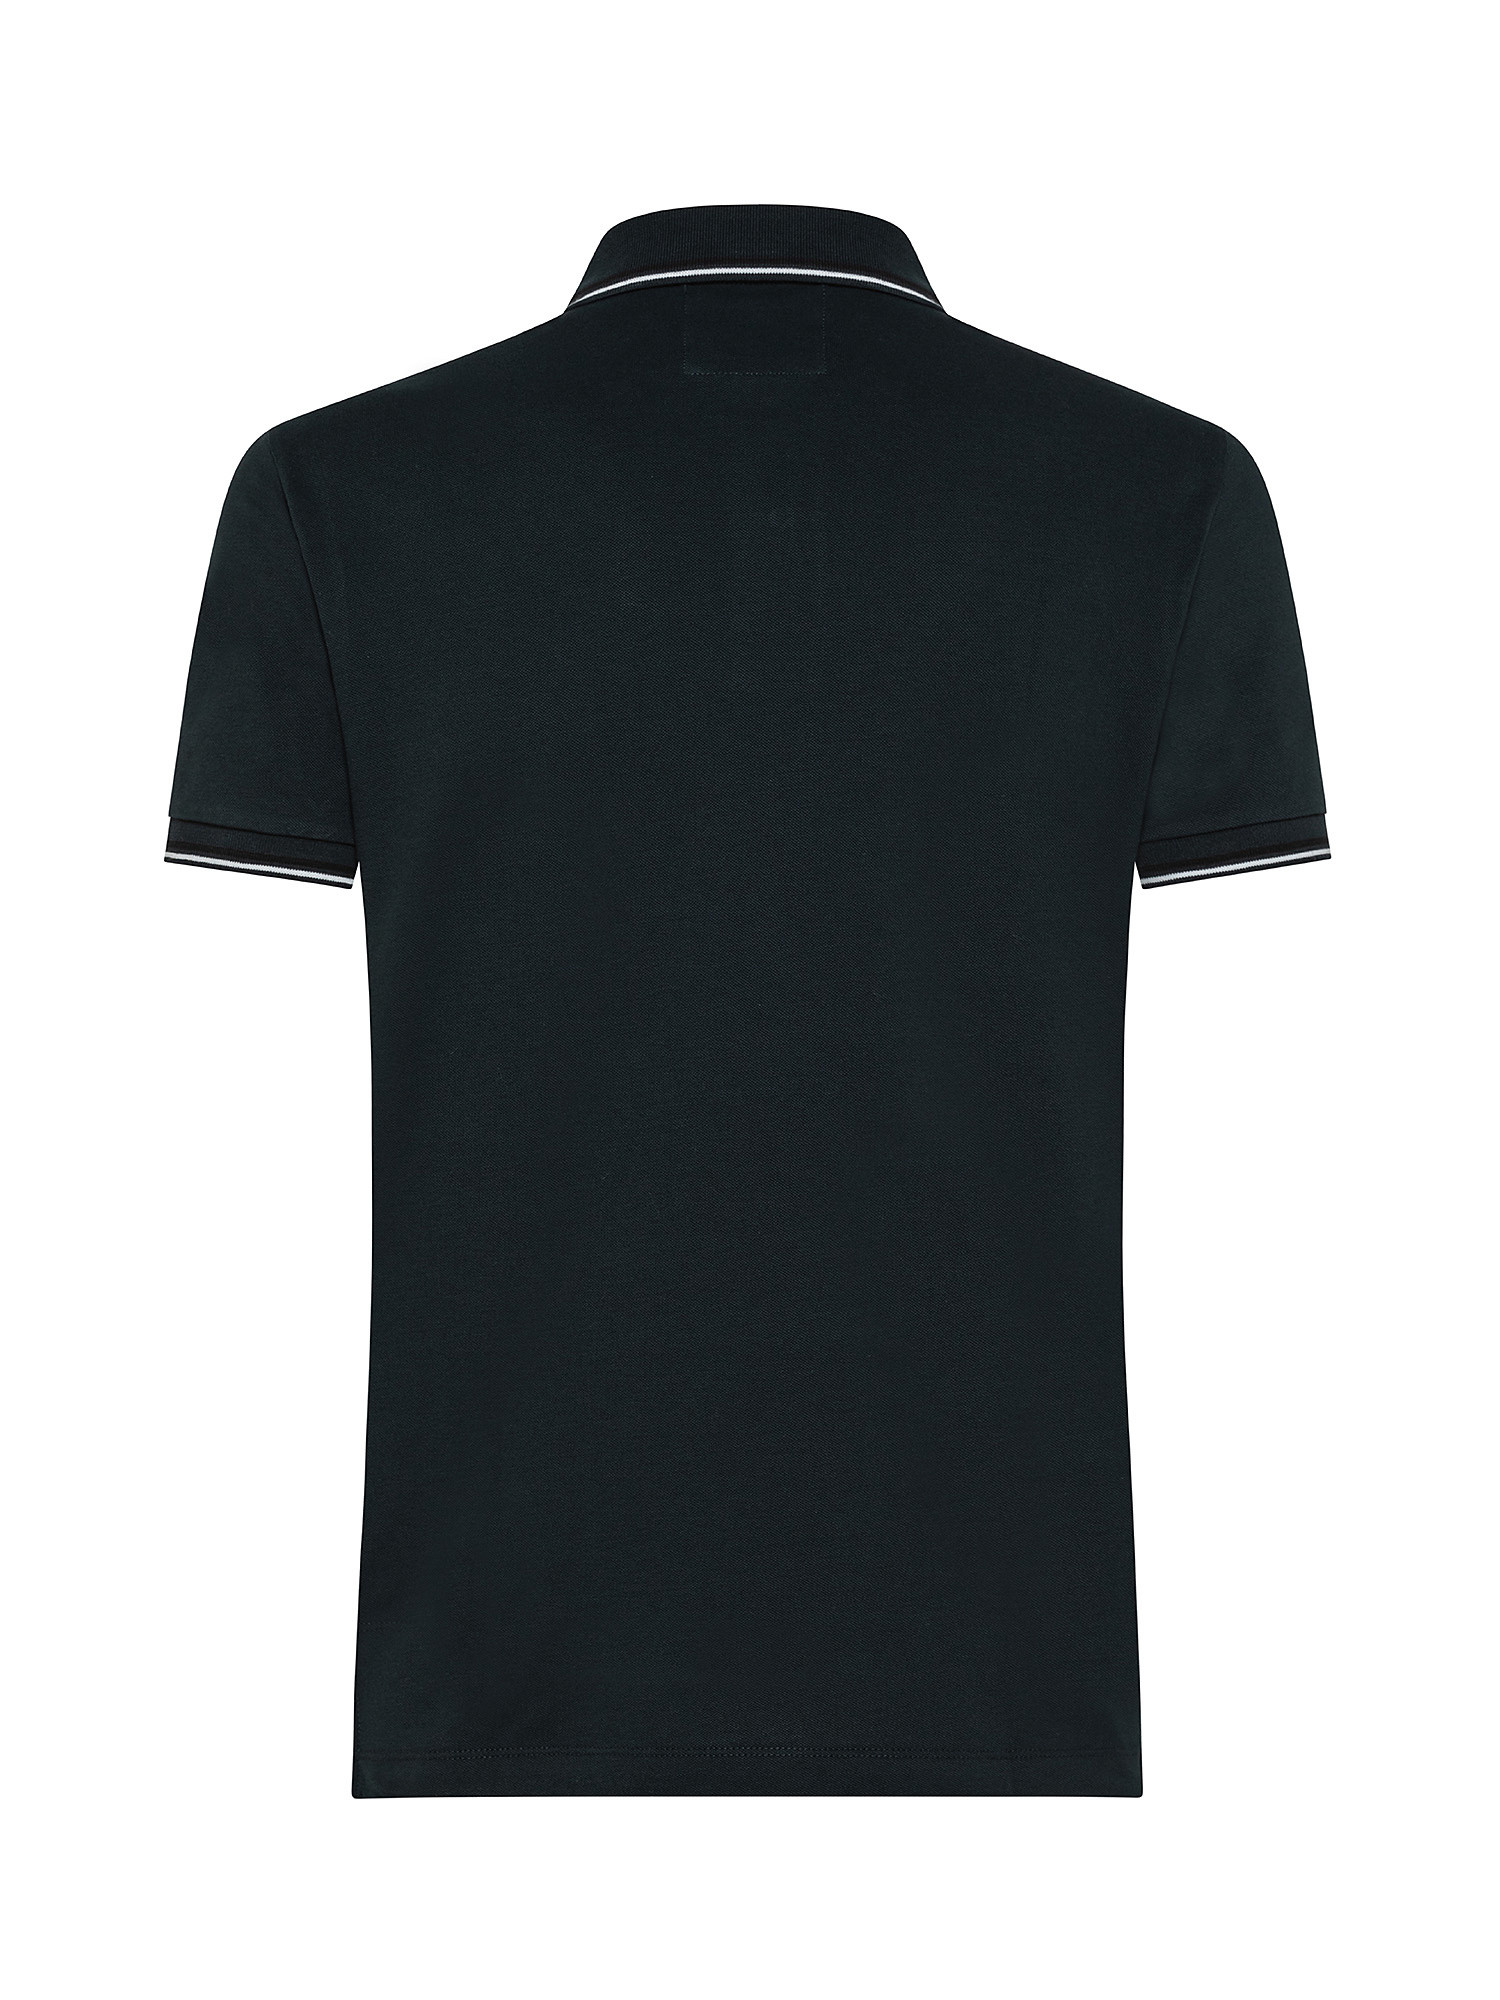 Piquet polo shirt, Green, large image number 1